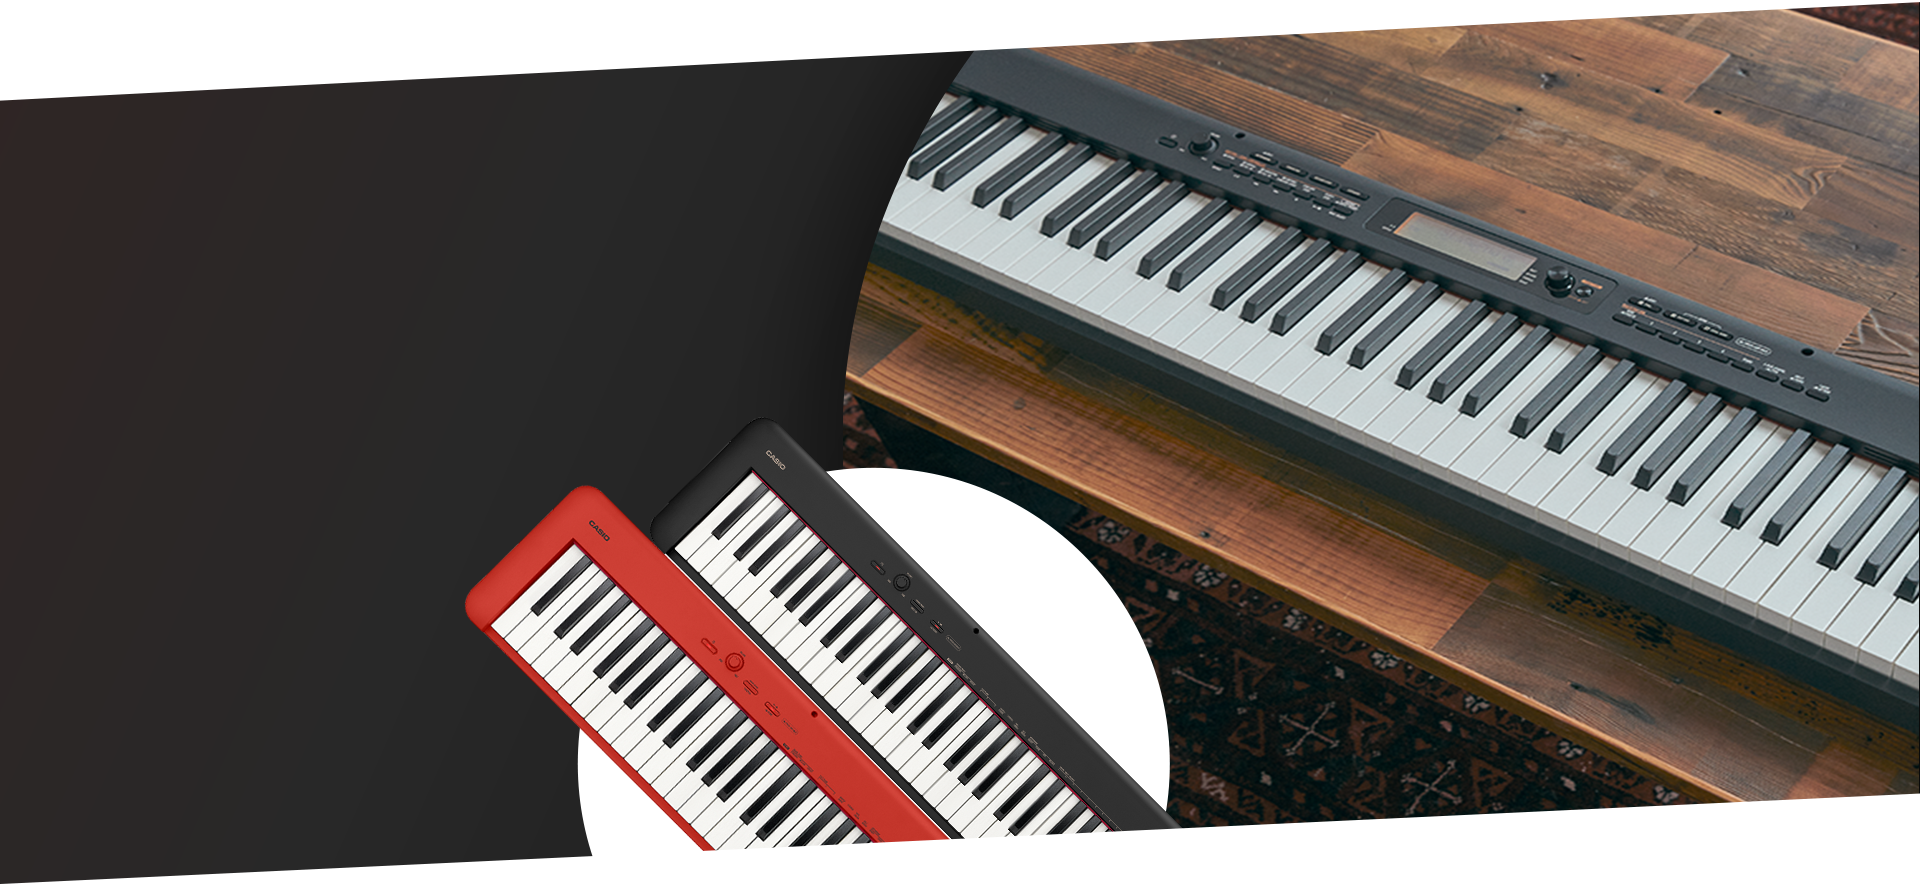 The best value in portable digital pianos is now even better.